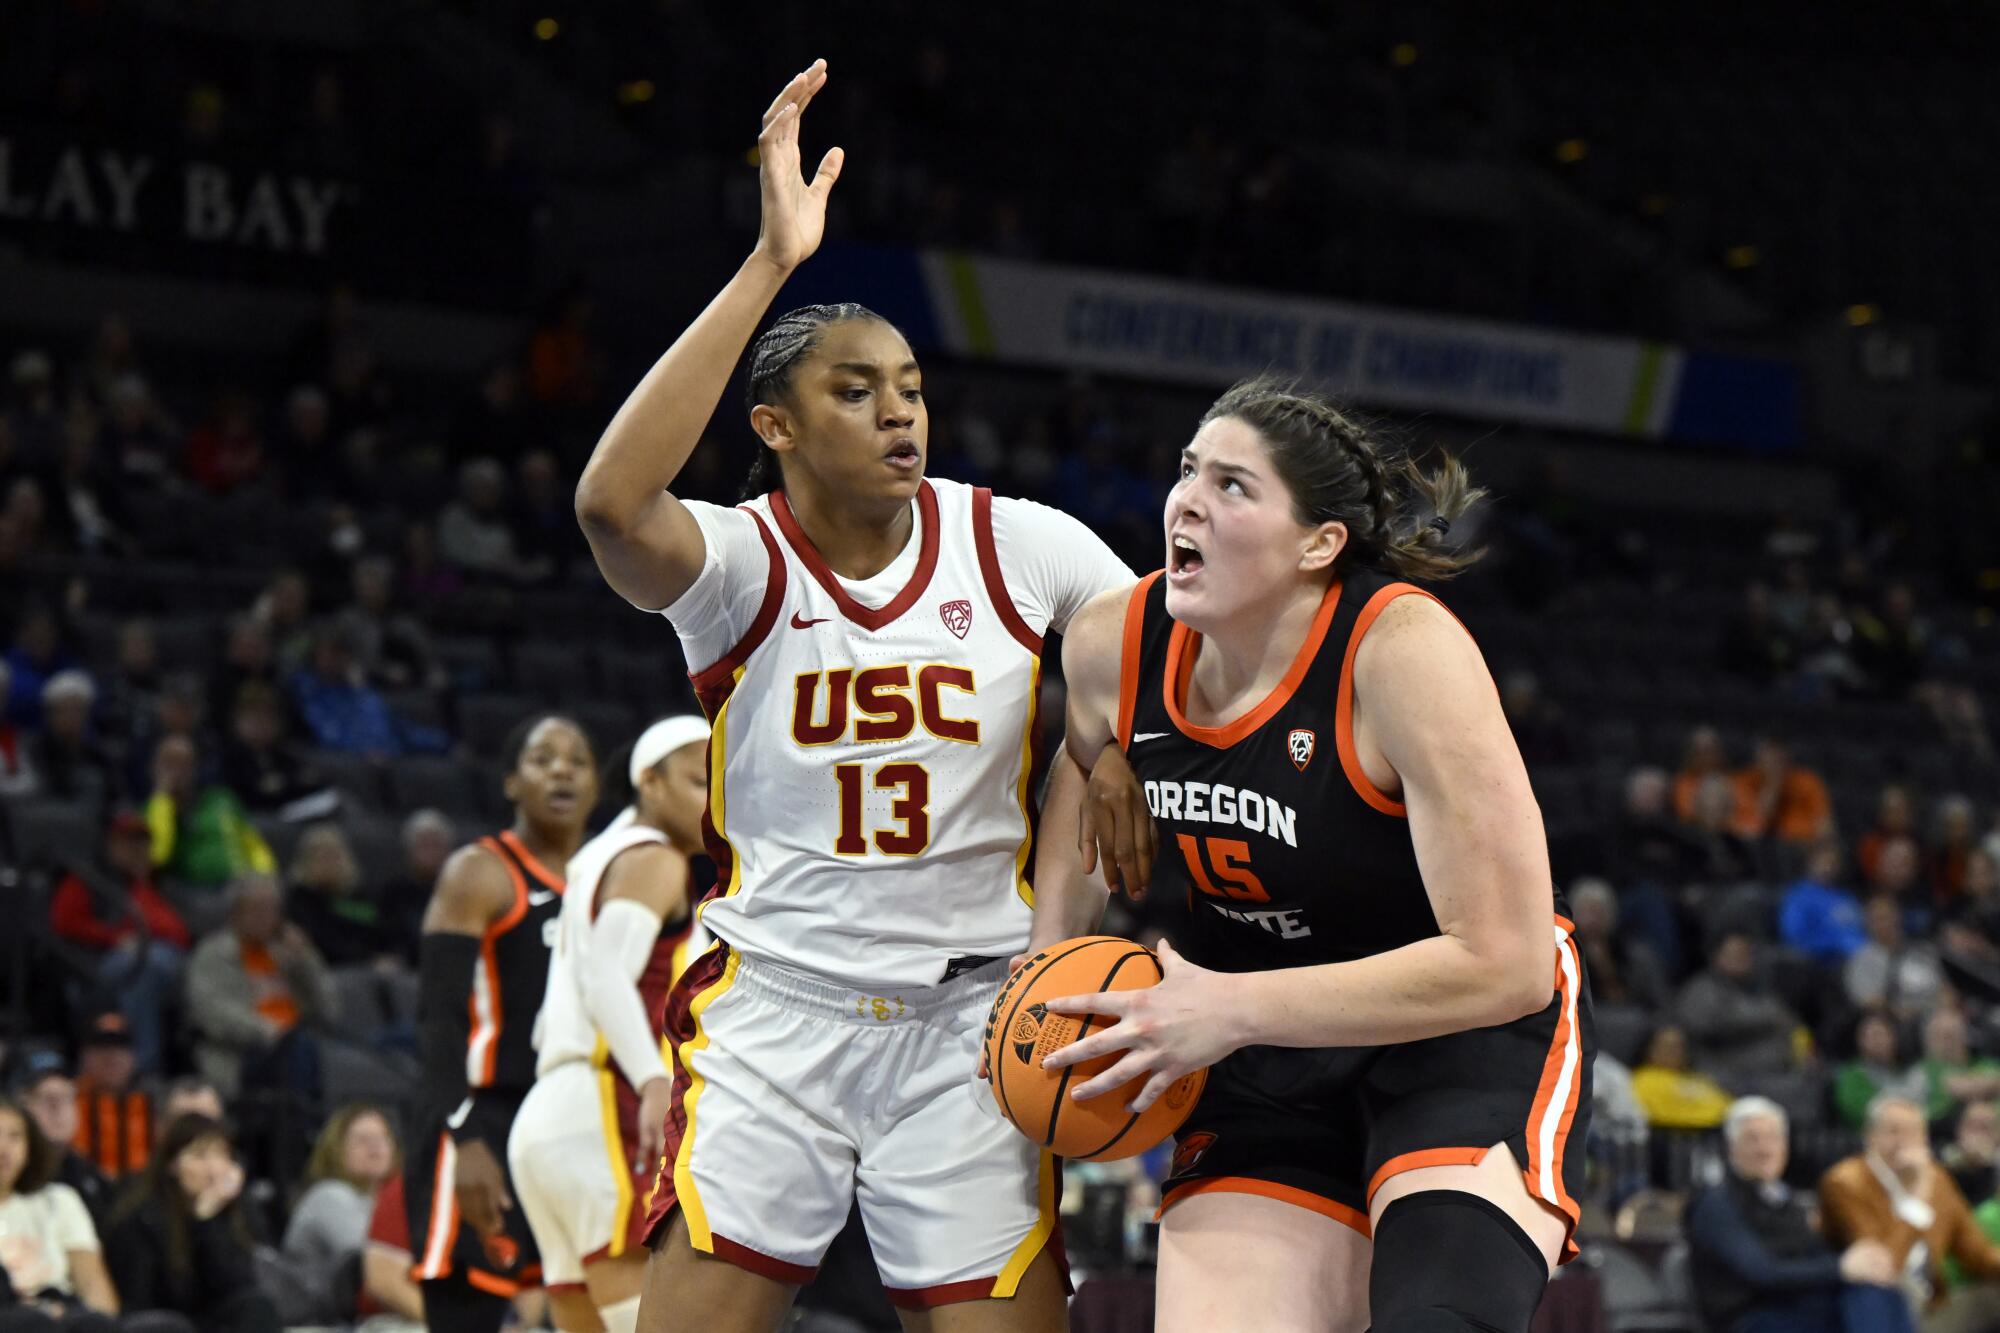 USC guard Rayah Marshall defends against Oregon State.